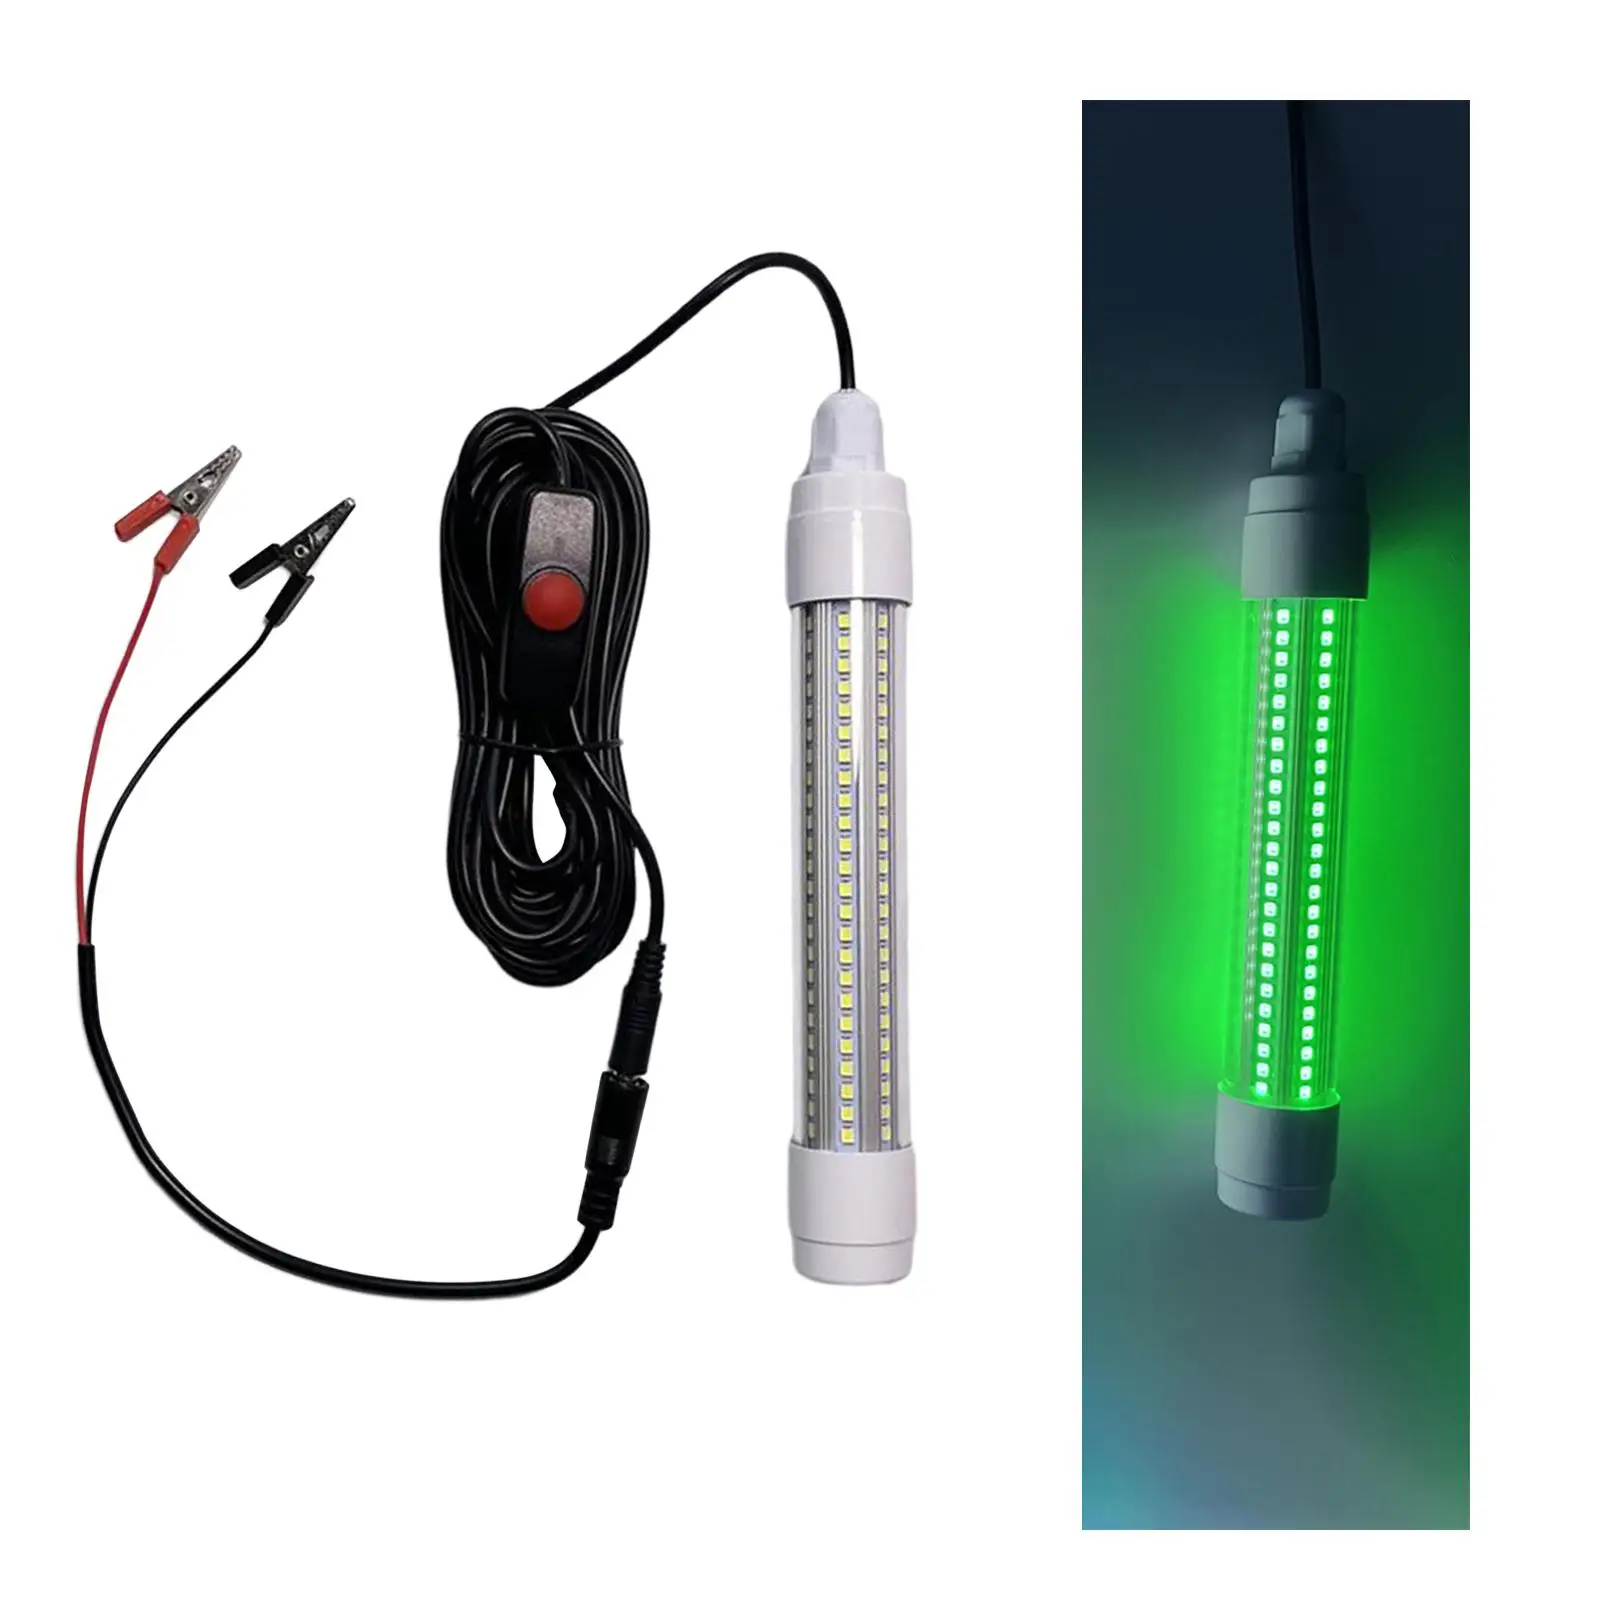 12V Fishing Light Lampswith 5M Power Cord Submersible Squid Attracter Light